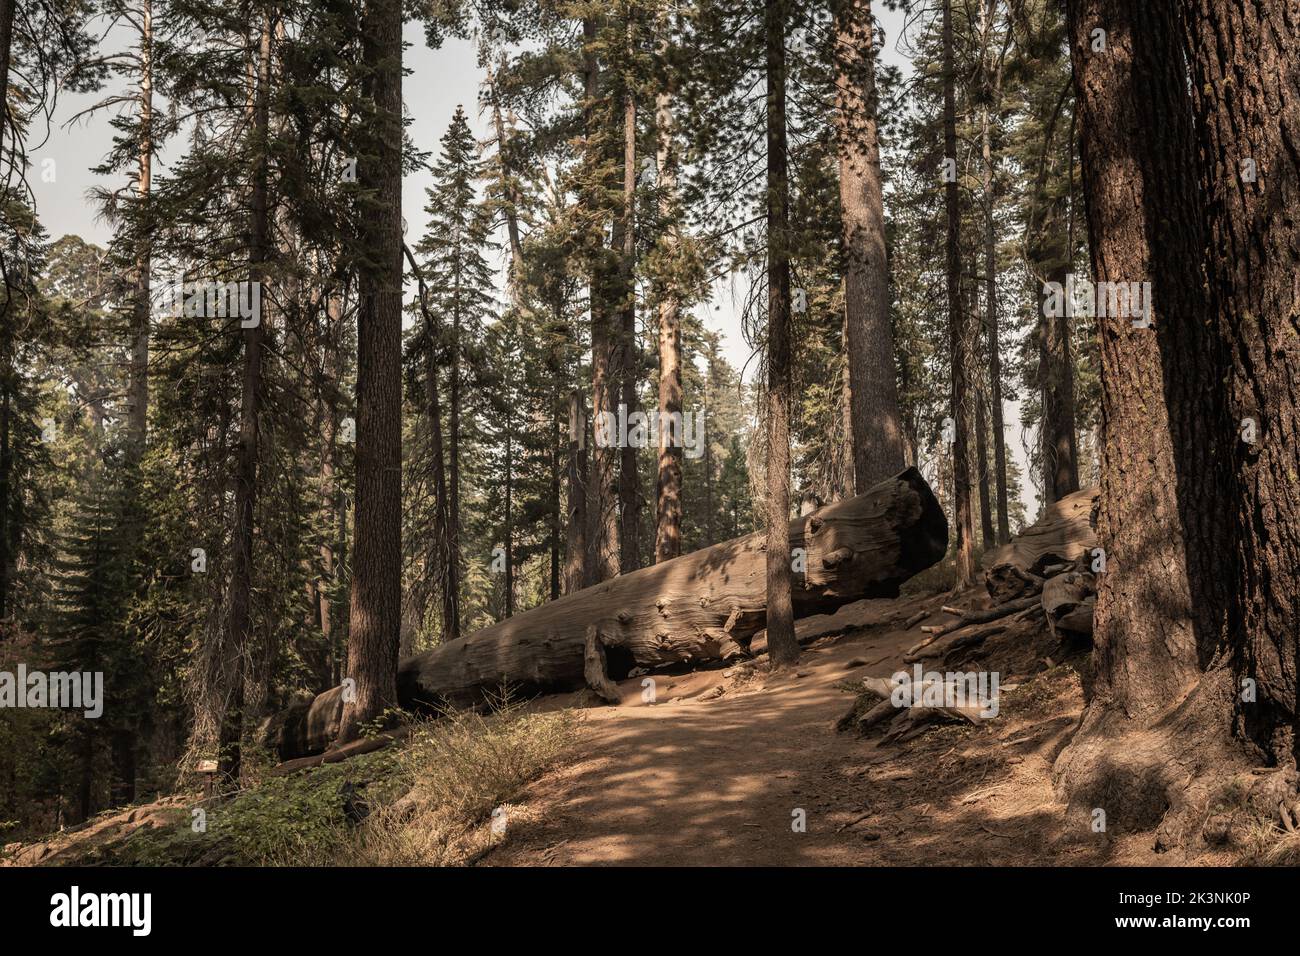 The Fallen Fire Tree Sequoia Trunk in Yosemite National Park Stock Photo